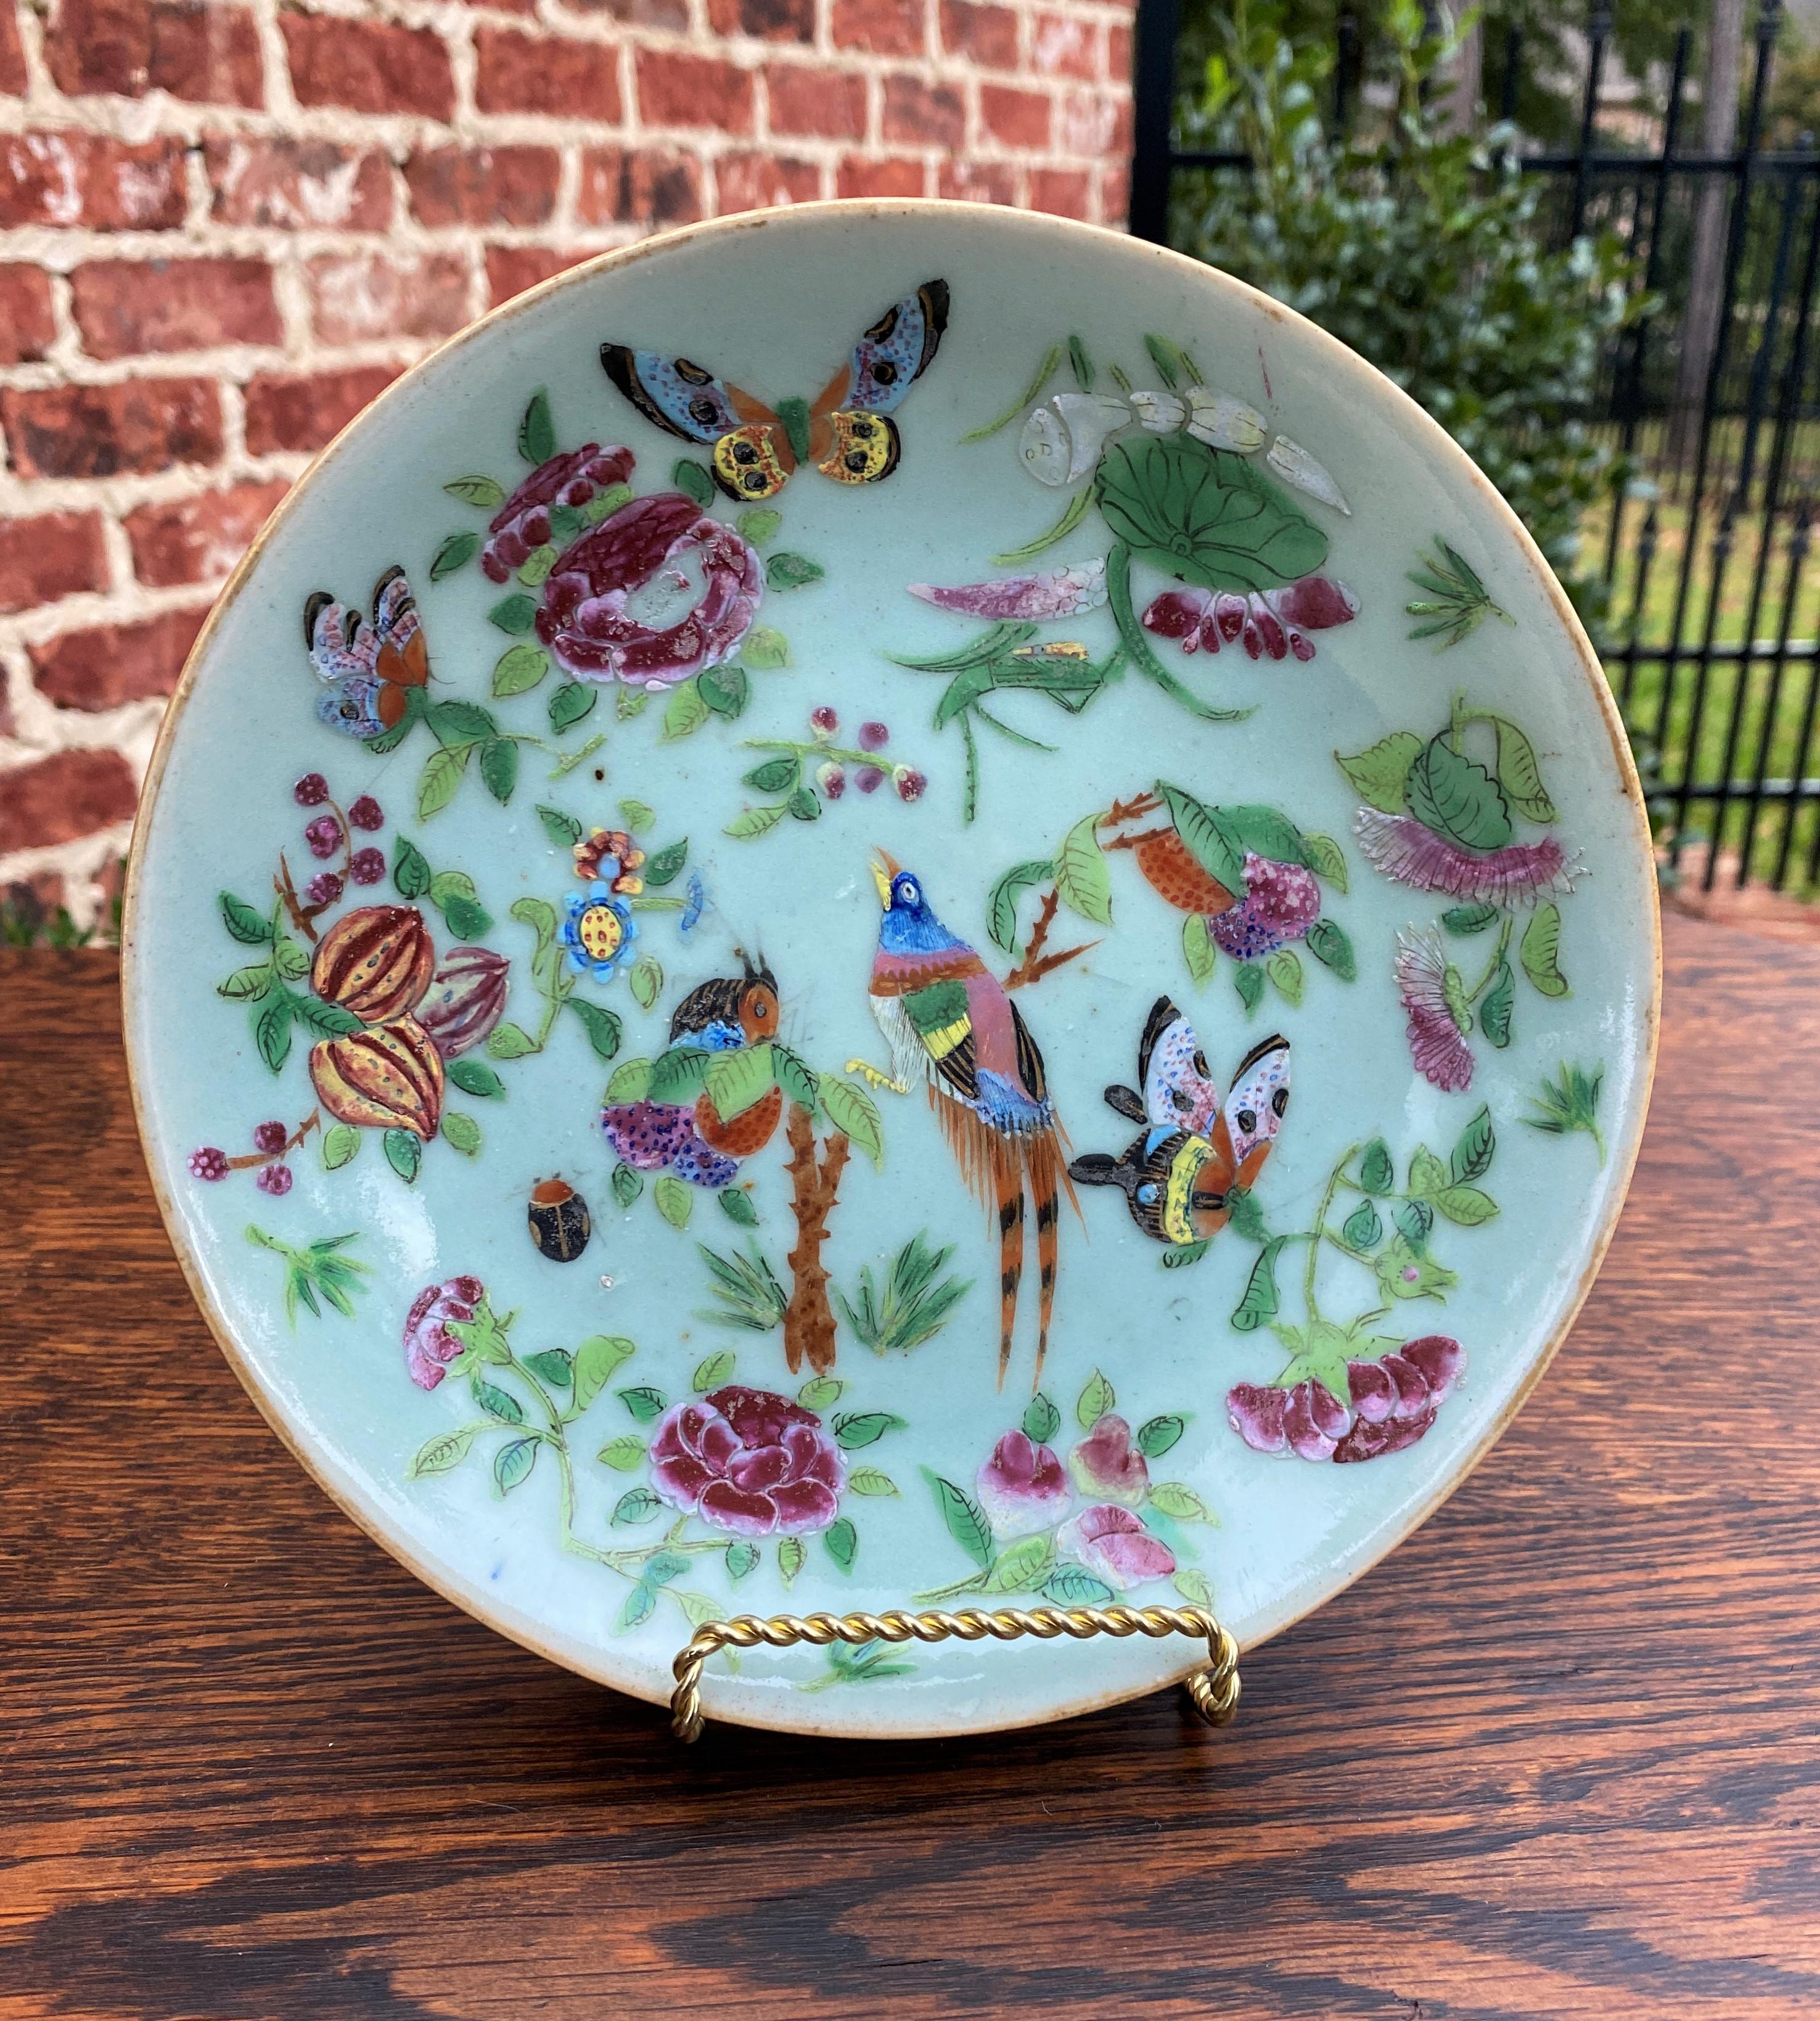 Antique Chinese Celadon plate #4~~Famille-Rose Palette~~Qing Dynasty~~c. 1820s

Beautiful antique Chinese (Canton) Celadon plate~~light green Celadon glaze with beautifully hand painted decoration in over-glaze poly-chrome enamels of the